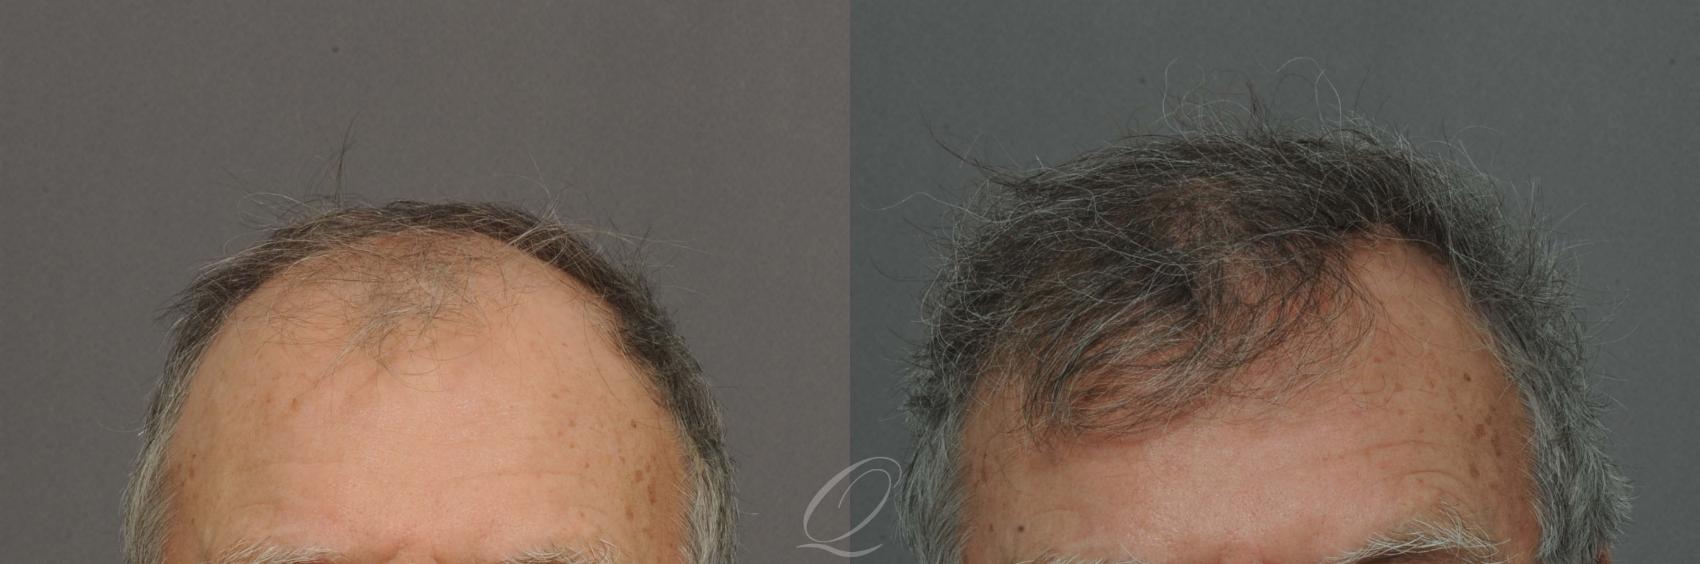 FUT Case 1026 Before & After View #1 | Serving Rochester, Syracuse & Buffalo, NY | Quatela Center for Plastic Surgery